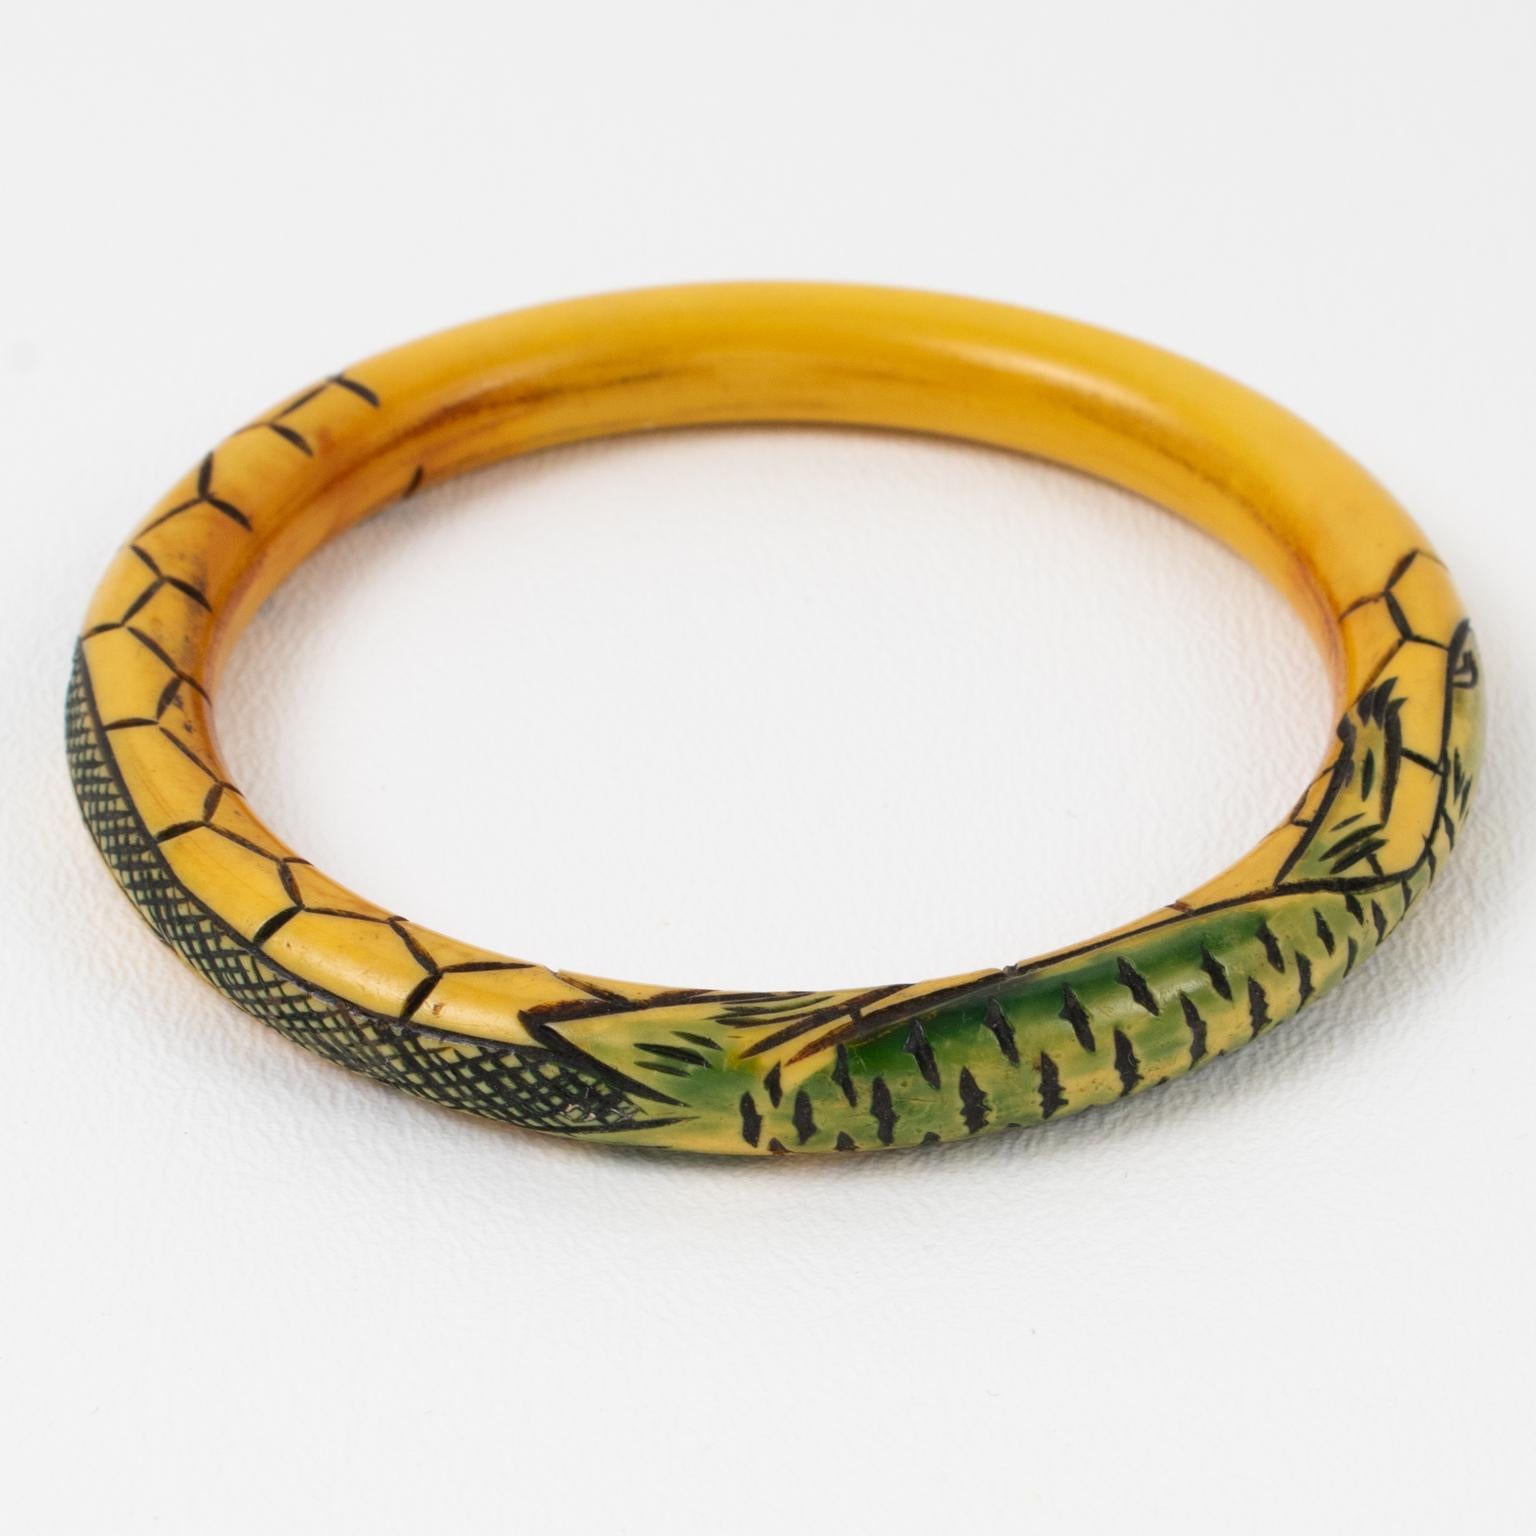 A stunning 1910s French Art Nouveau Celluloid bracelet bangle. The piece features a hand-carved lizard design. The bracelet has a nice off-white cream color with black and green contrast in the carved design. This is a striking and unique bracelet.